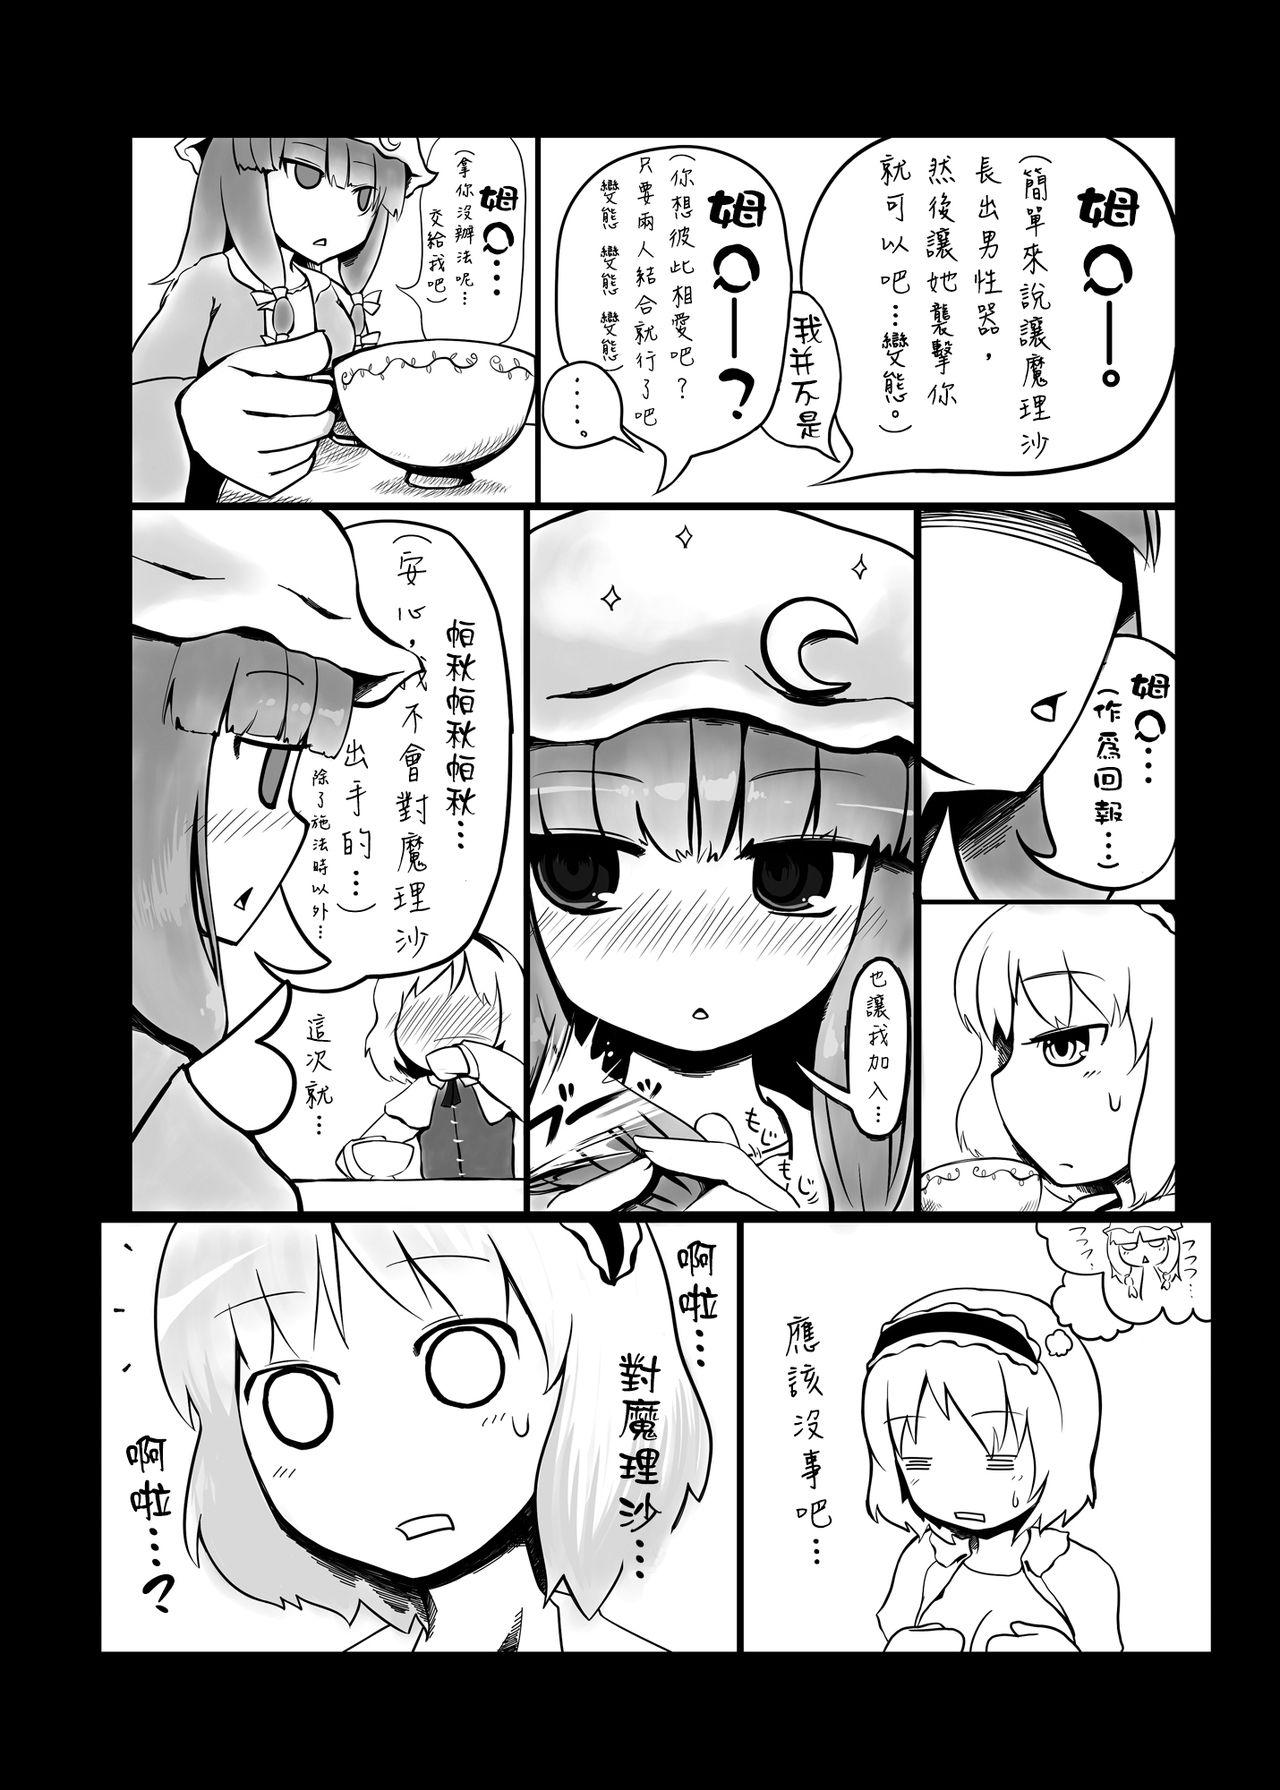 Sexcams Touhou Ero Atsume. - Touhou project Real Orgasm - Page 10